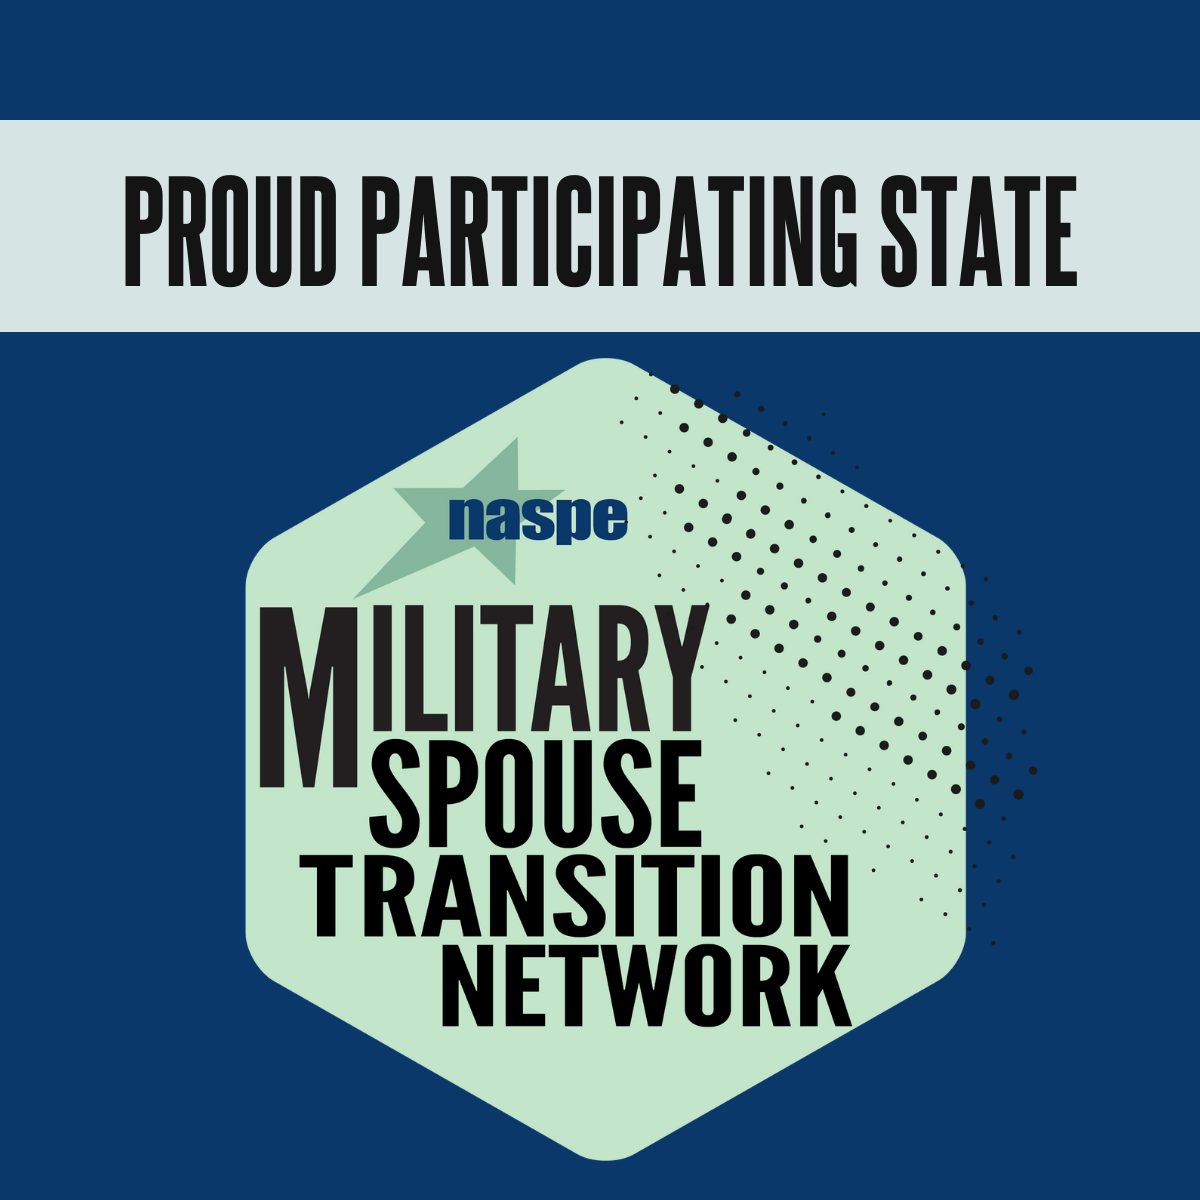 military spouse transition network social graphic